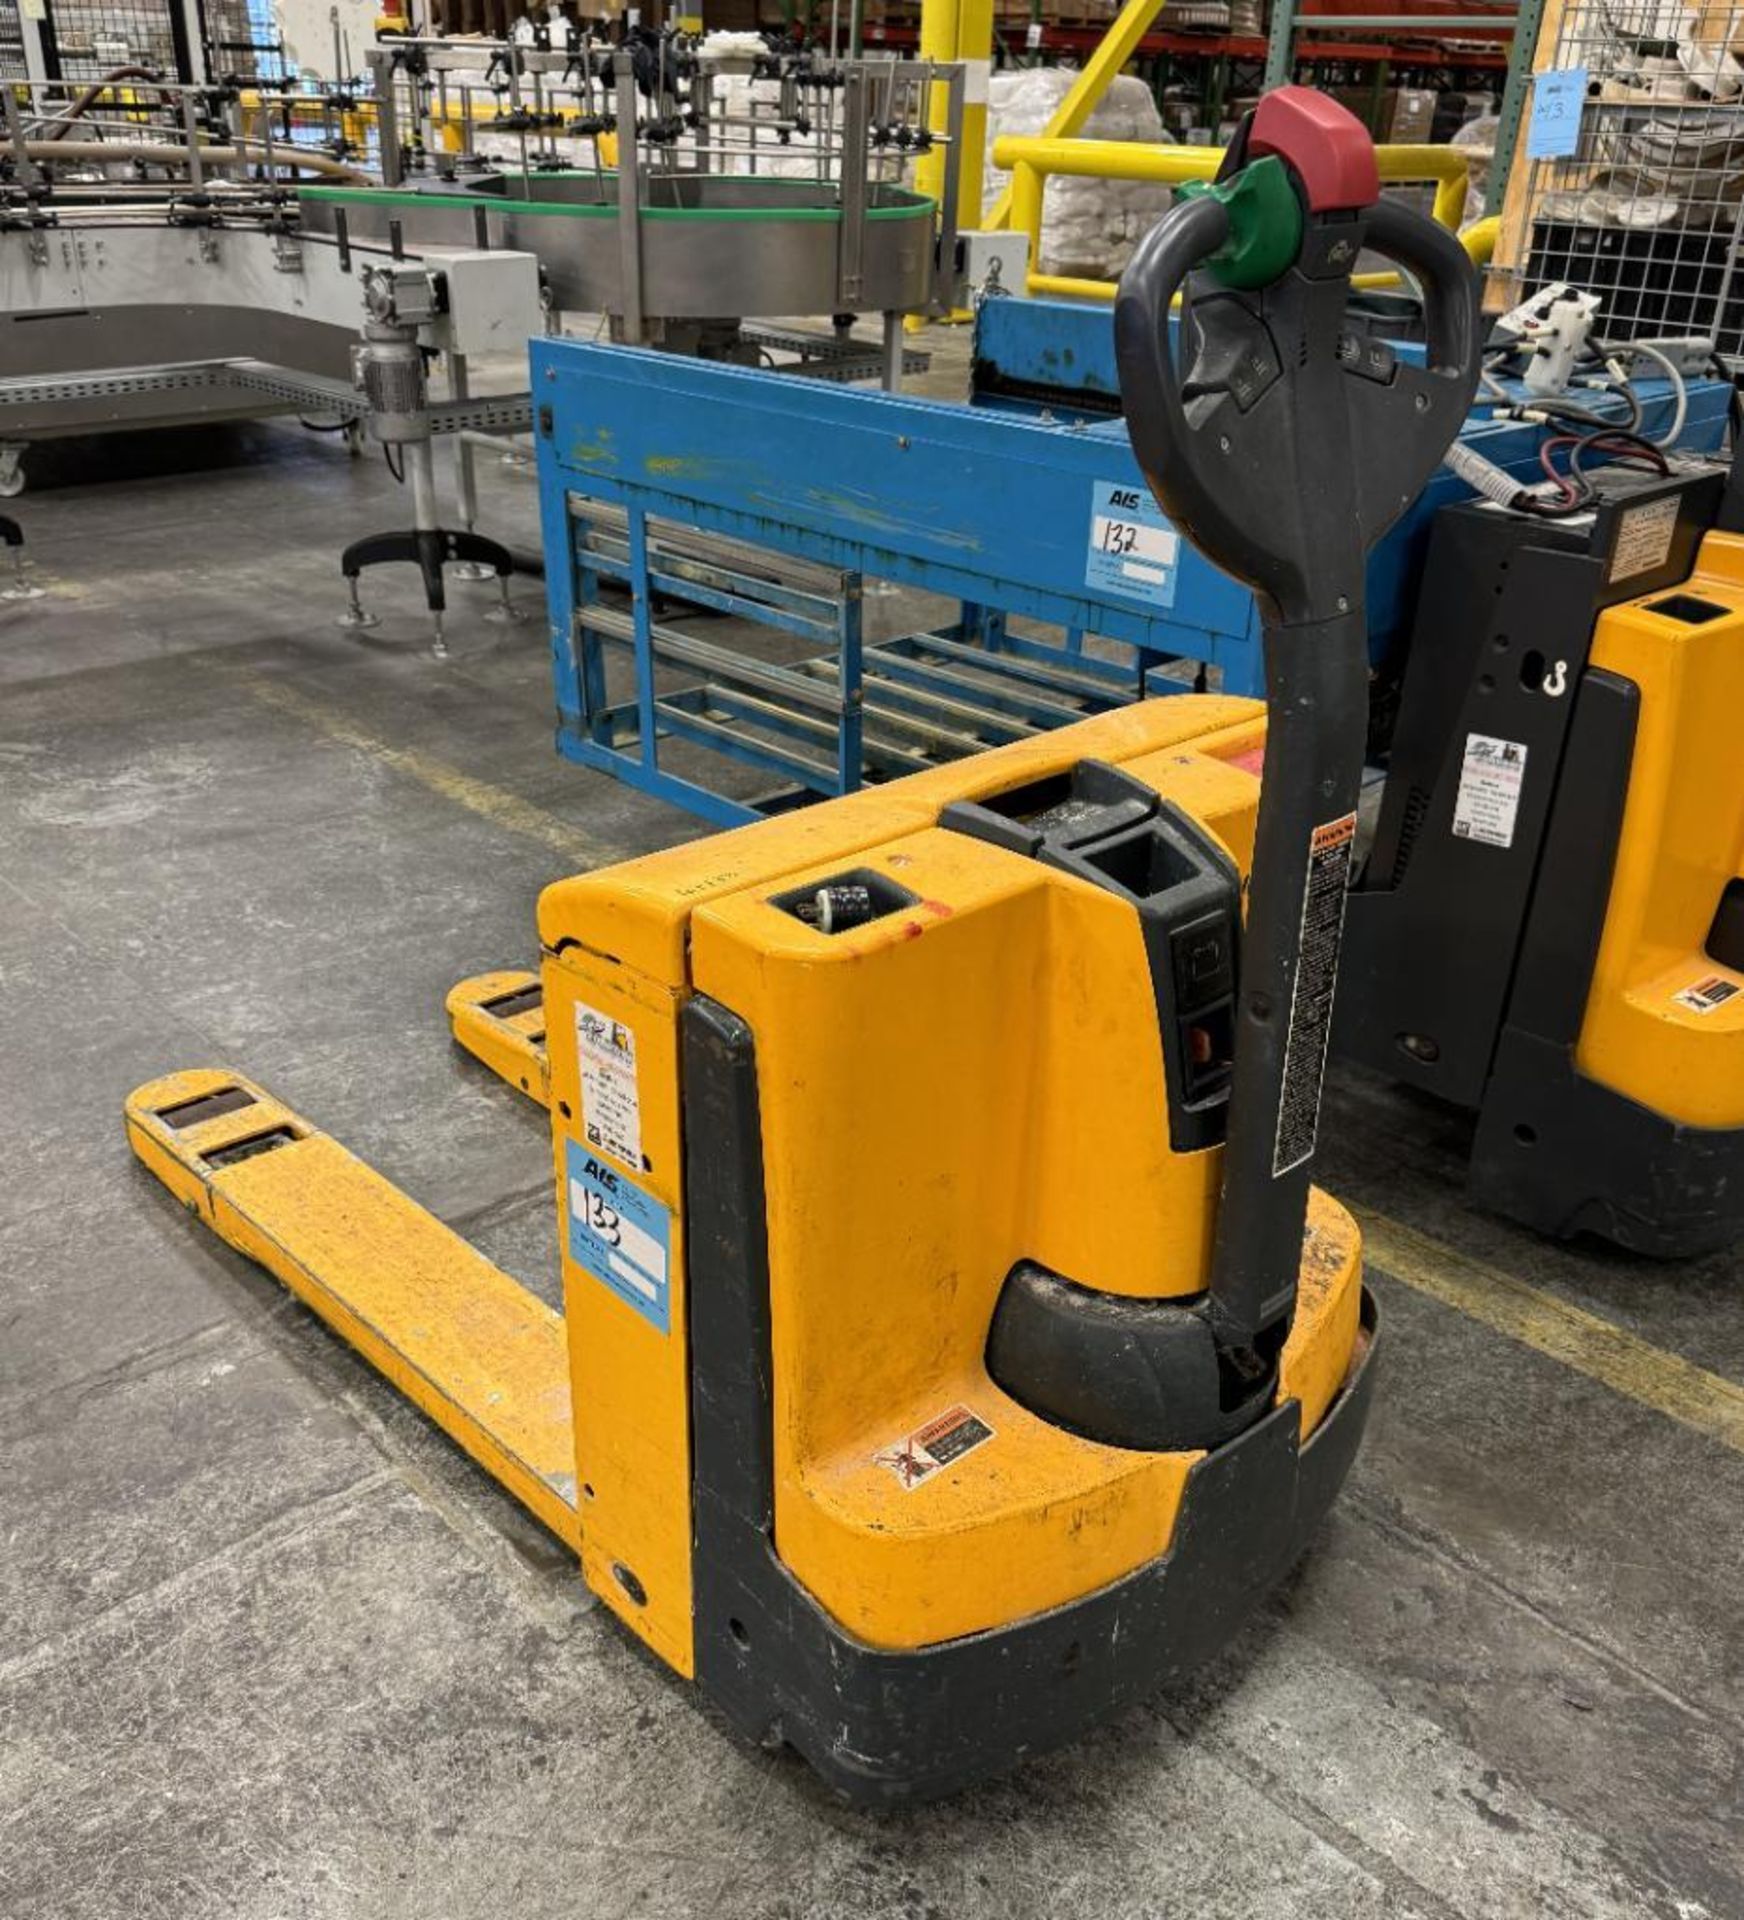 Jungheinrich Approximate 4500 Pound Electric Pallet Jack, Model EJE120, Serial# 98087076.